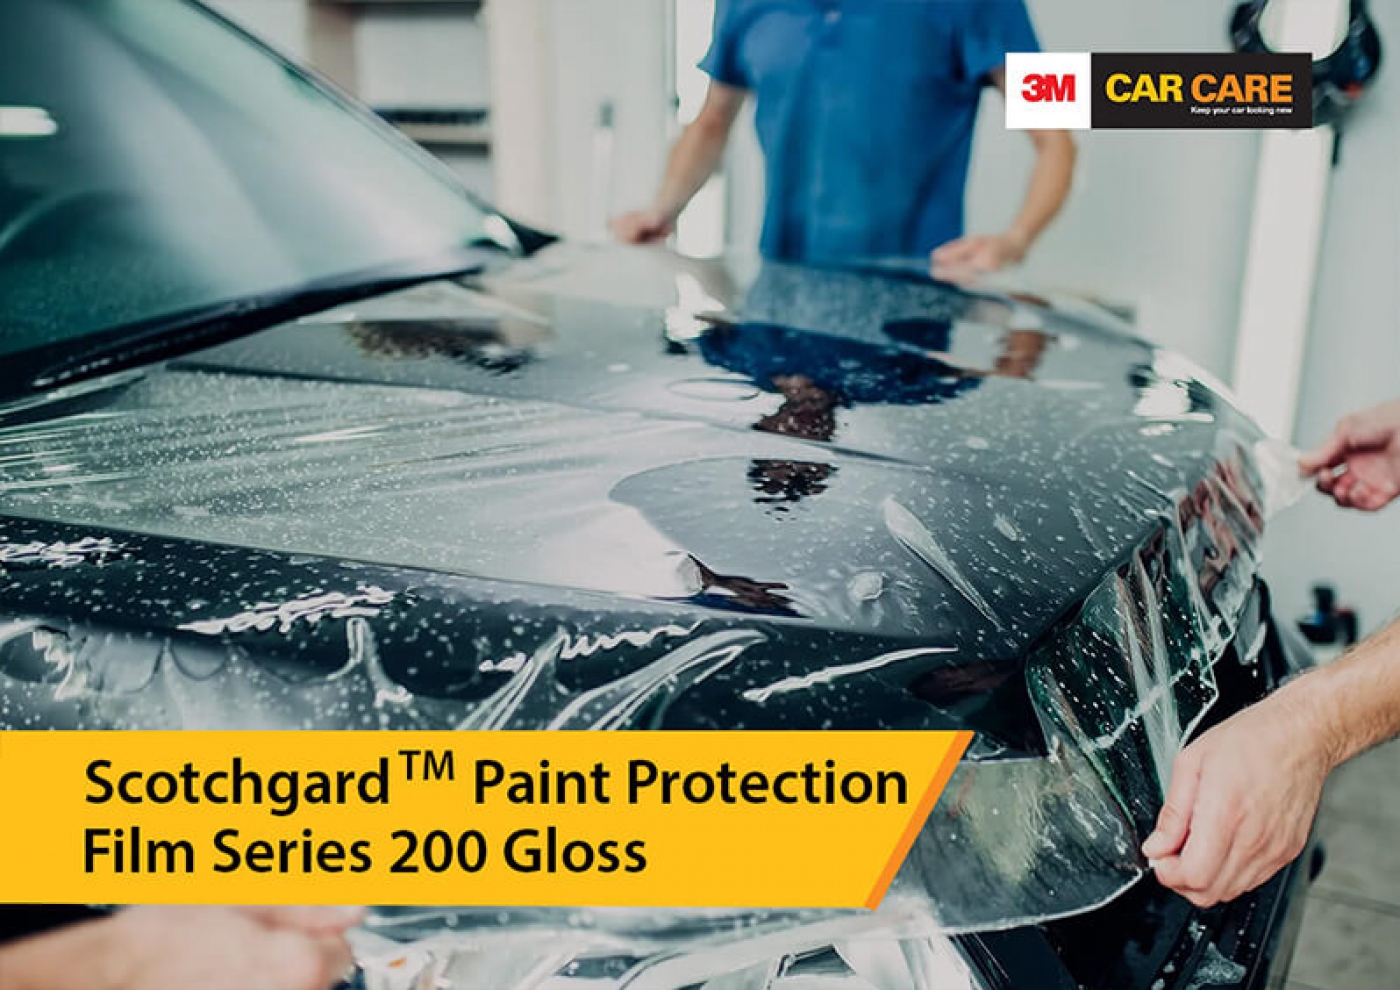 3M Paint Protection Film for Cars